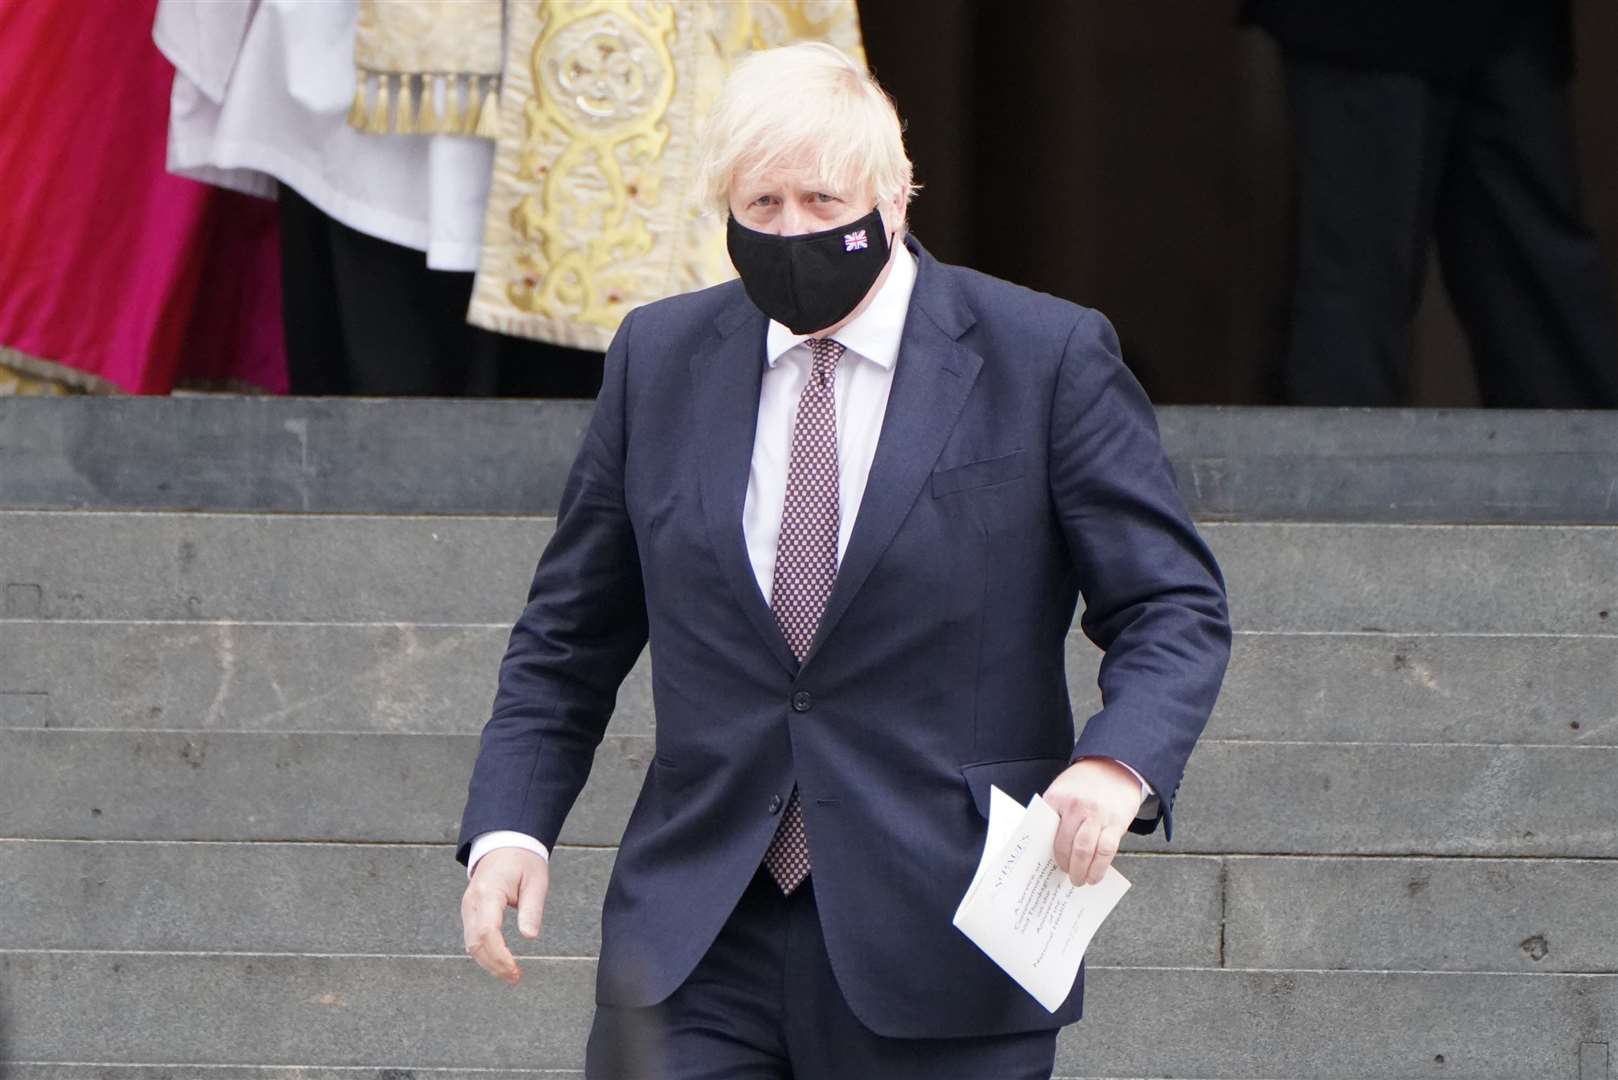 Prime Minister Boris Johnson will now be isolating at Chequers